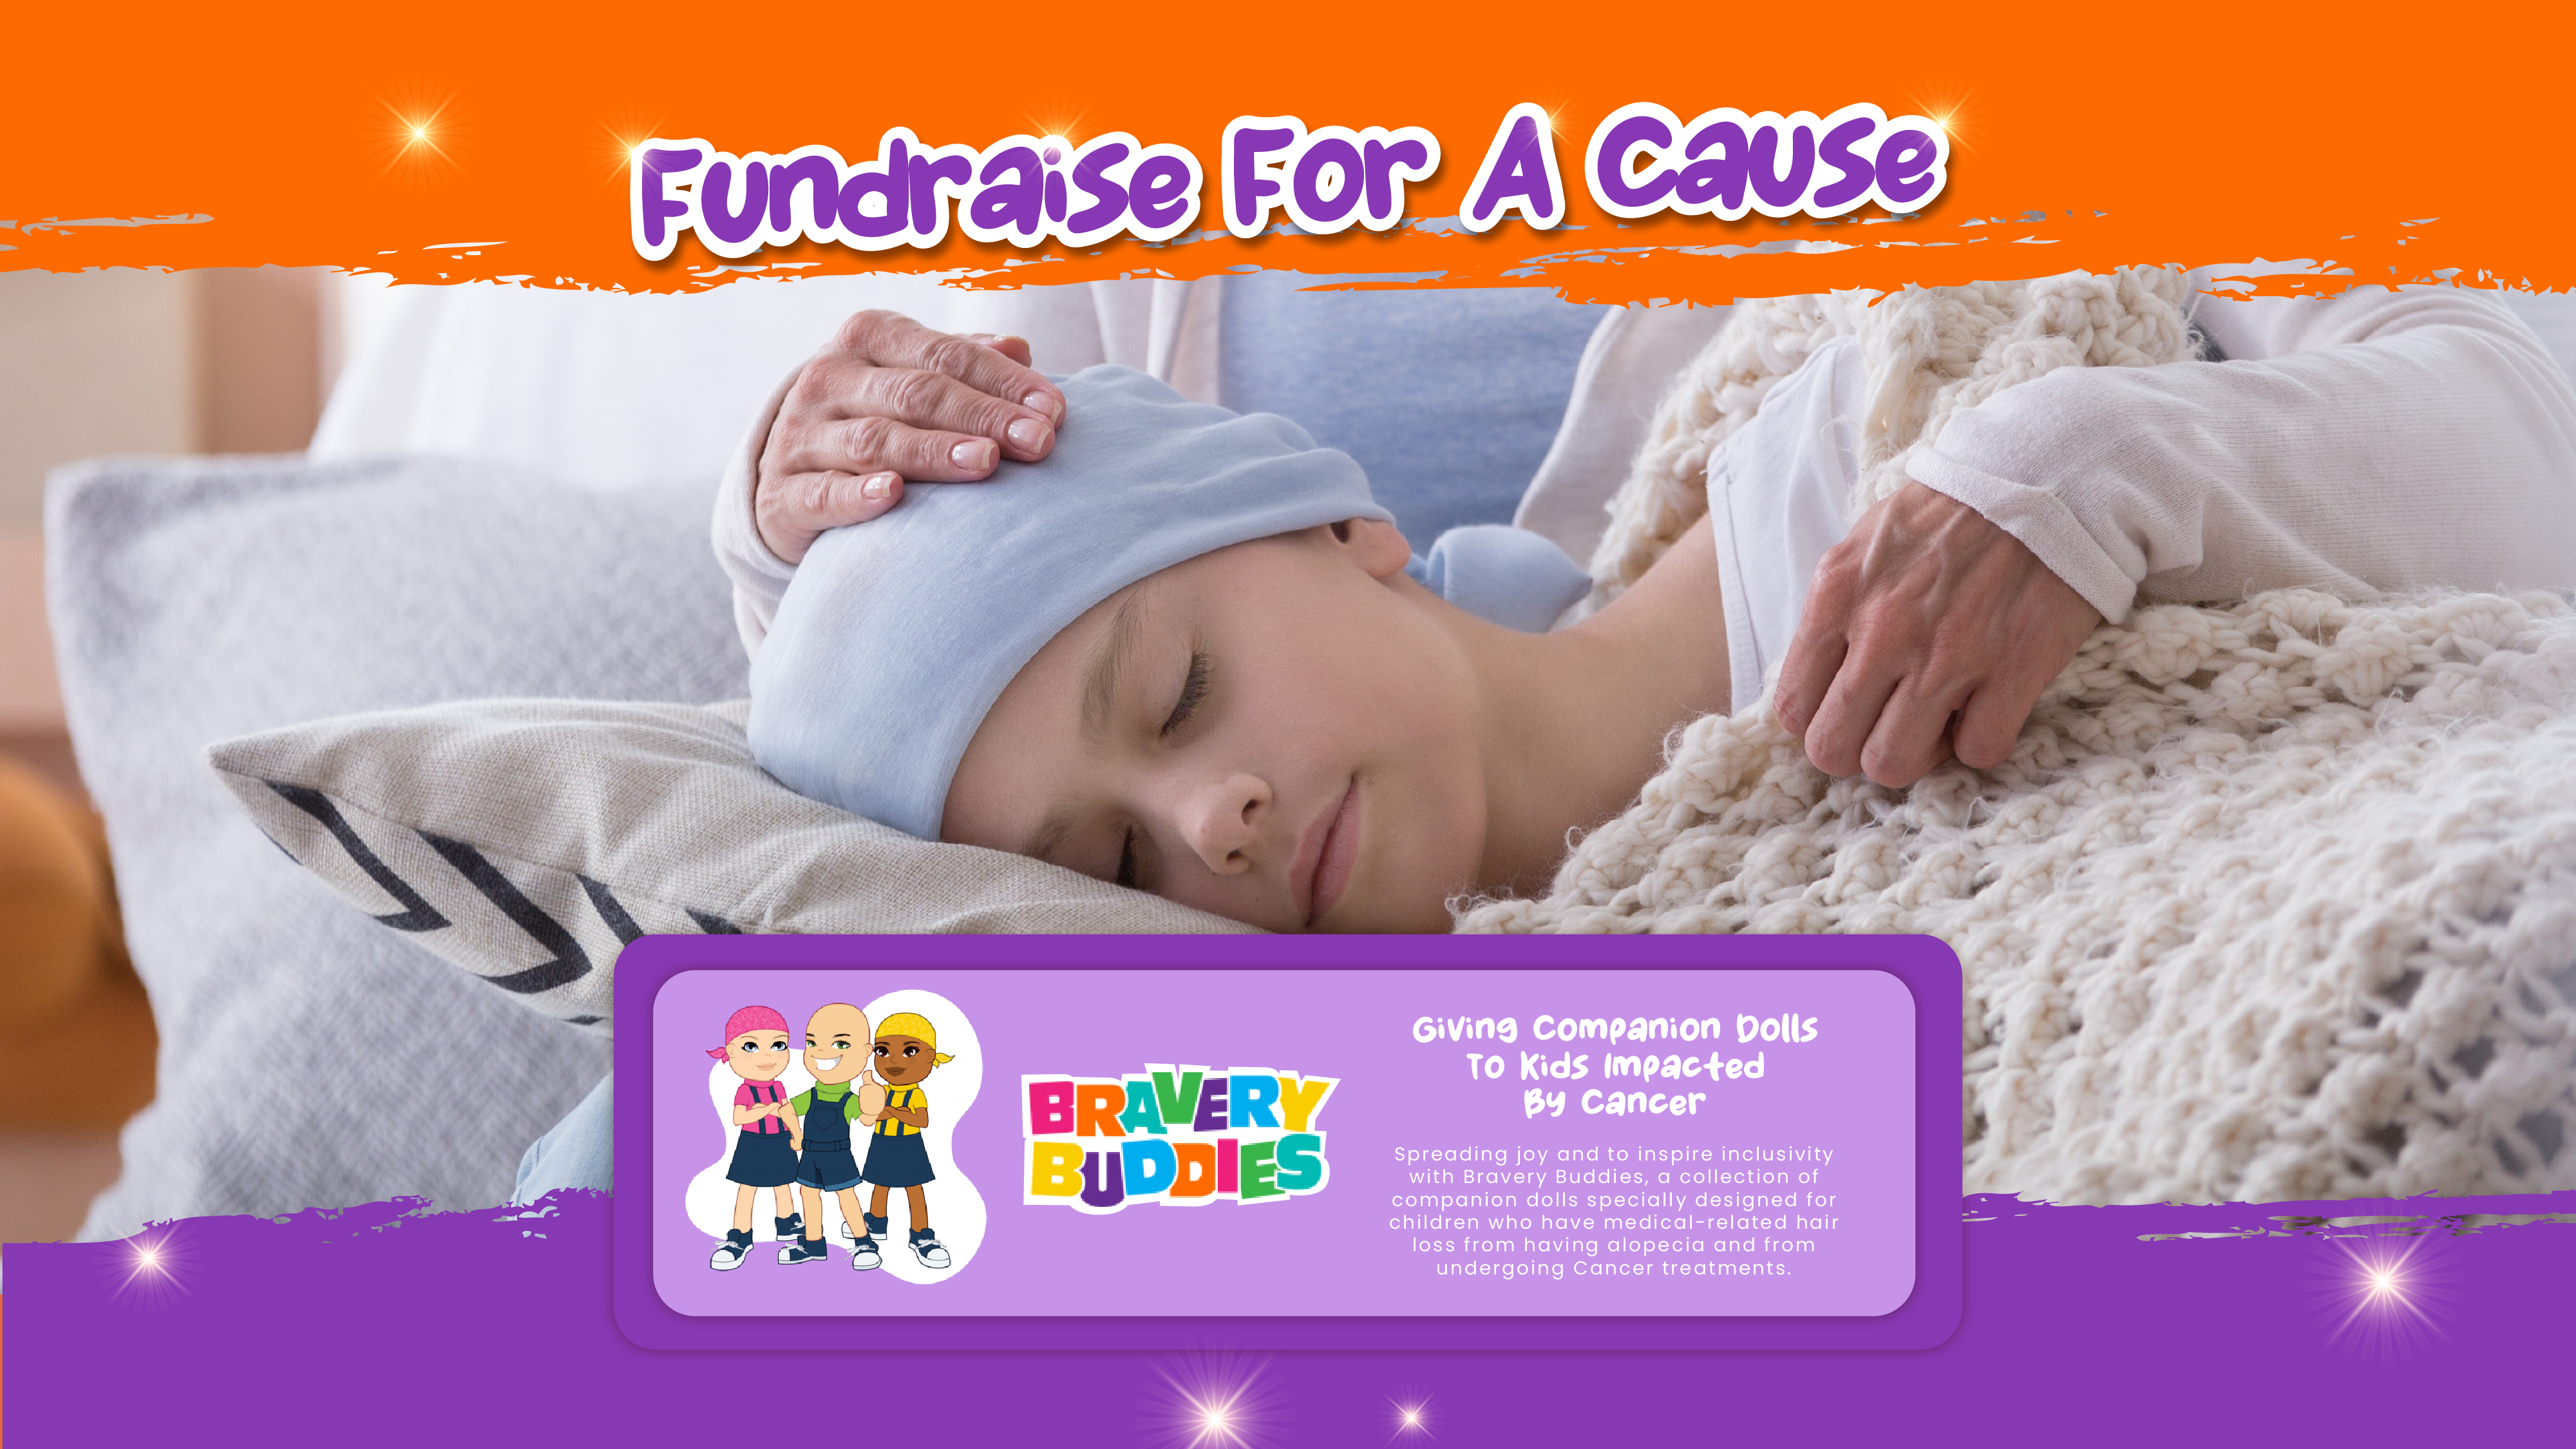 FUNDRAISE FOR A CAUSE - Bravery Buddies